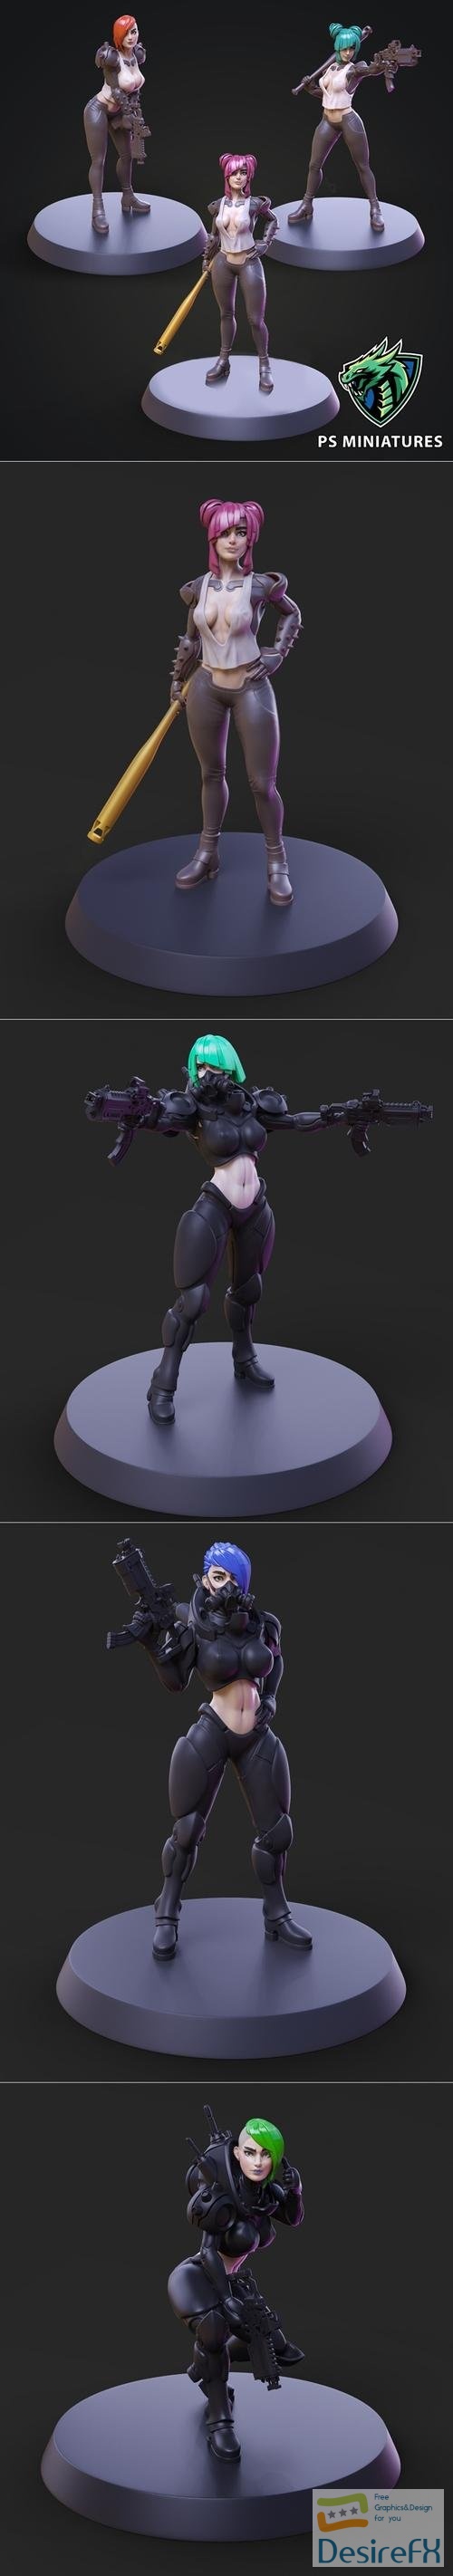 PSMiniatures CyberSmut Collection – 3D Print